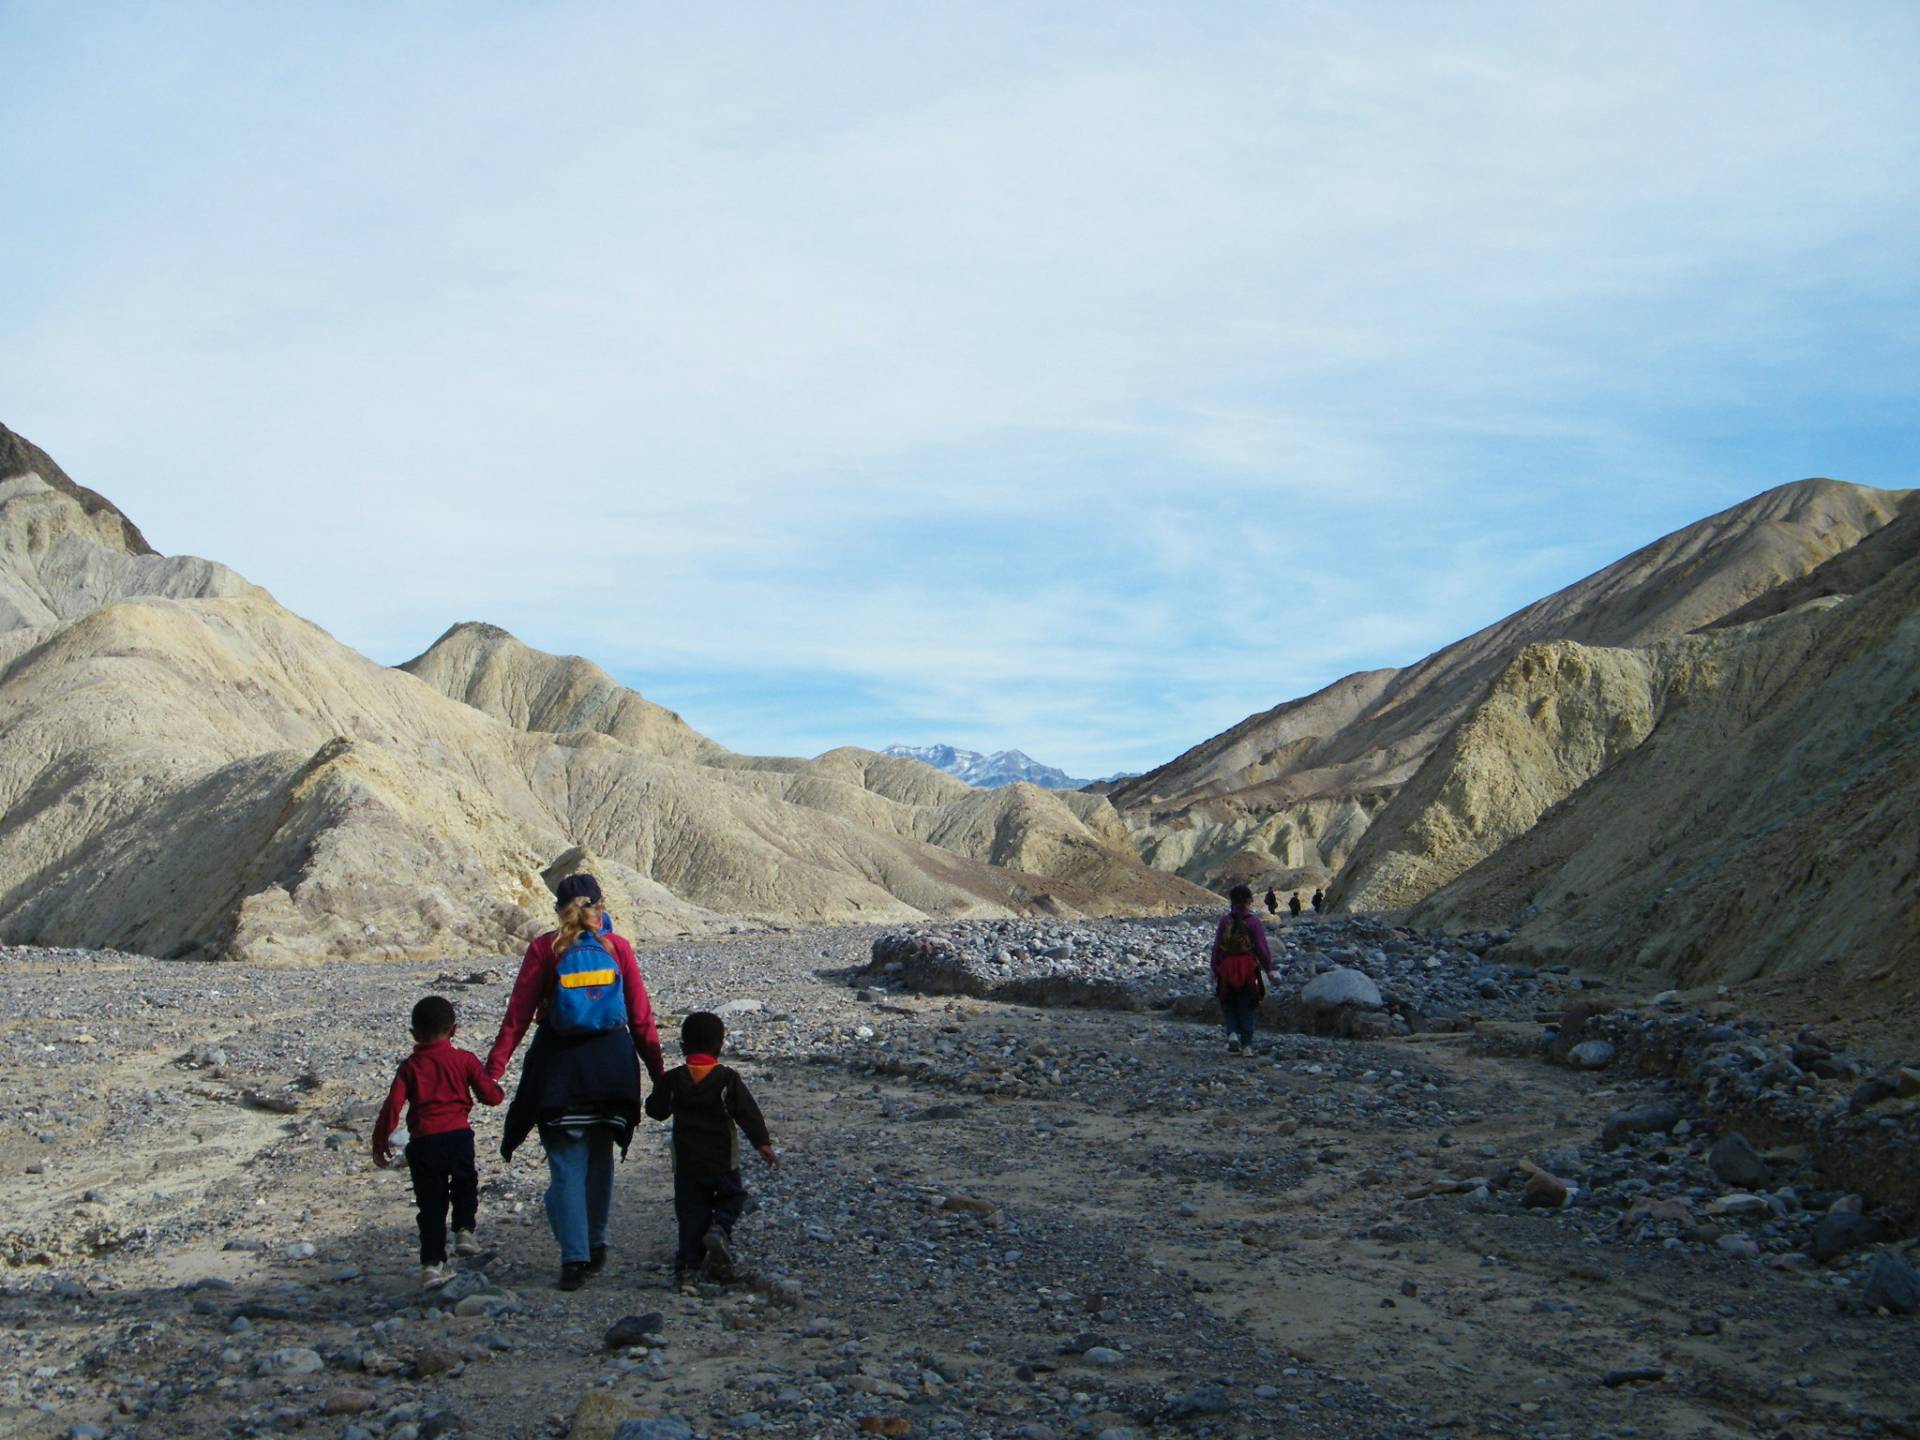 Hikers in Gower Gulch, Death Valley National Park, California